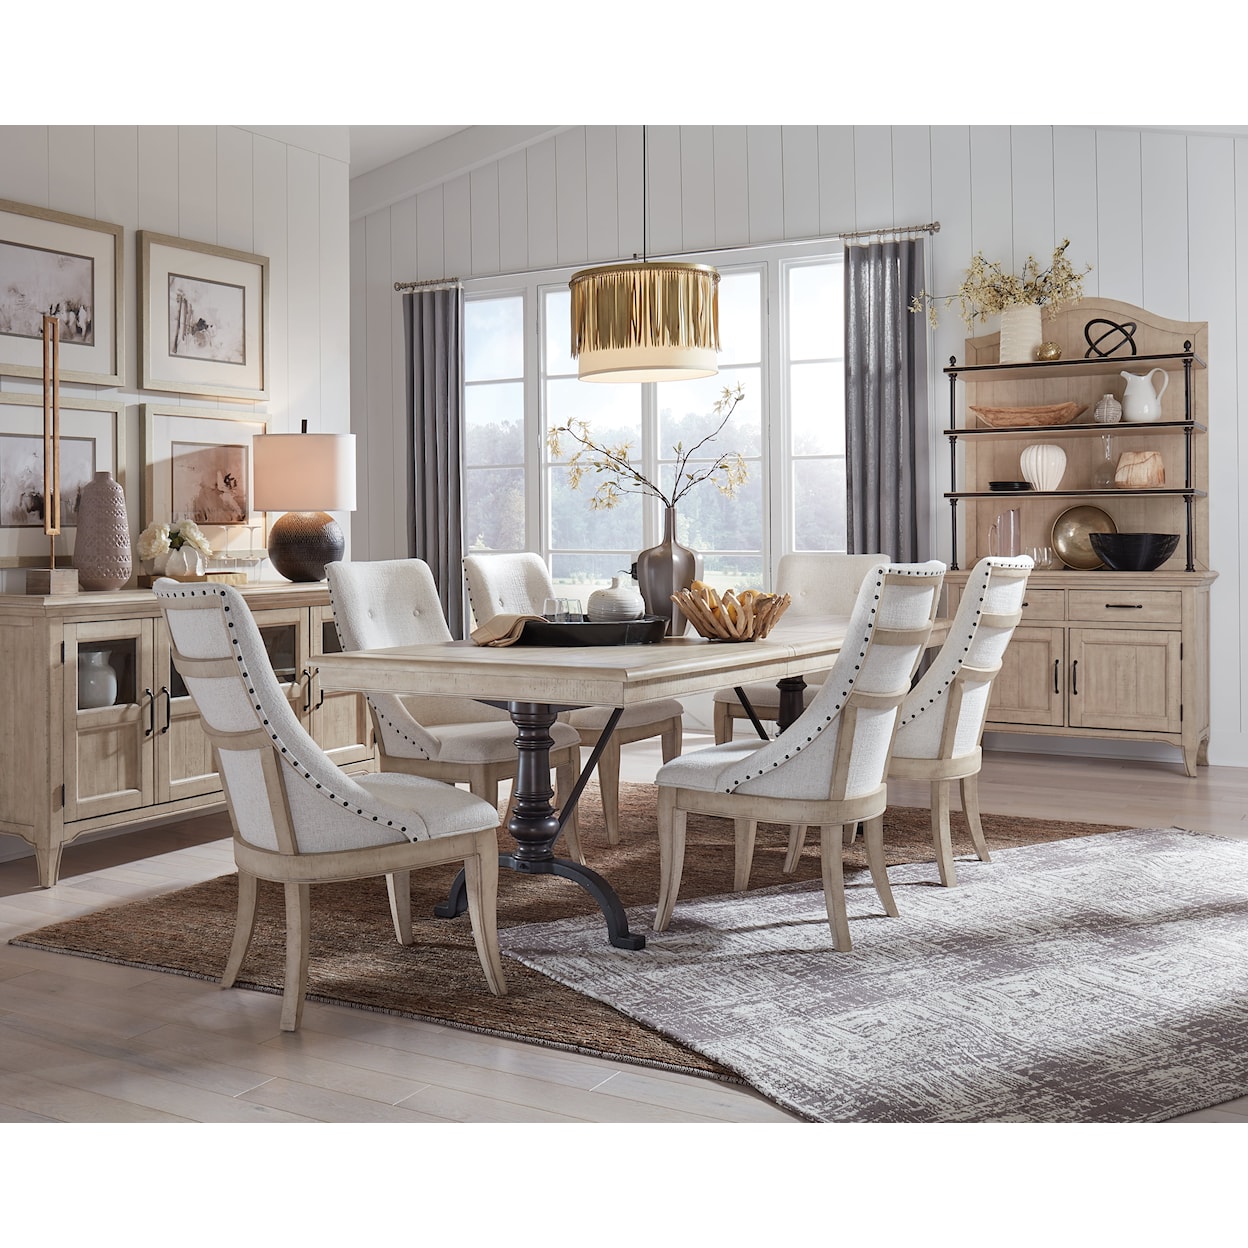 Magnussen Home Harlow Dining Dining Room Group